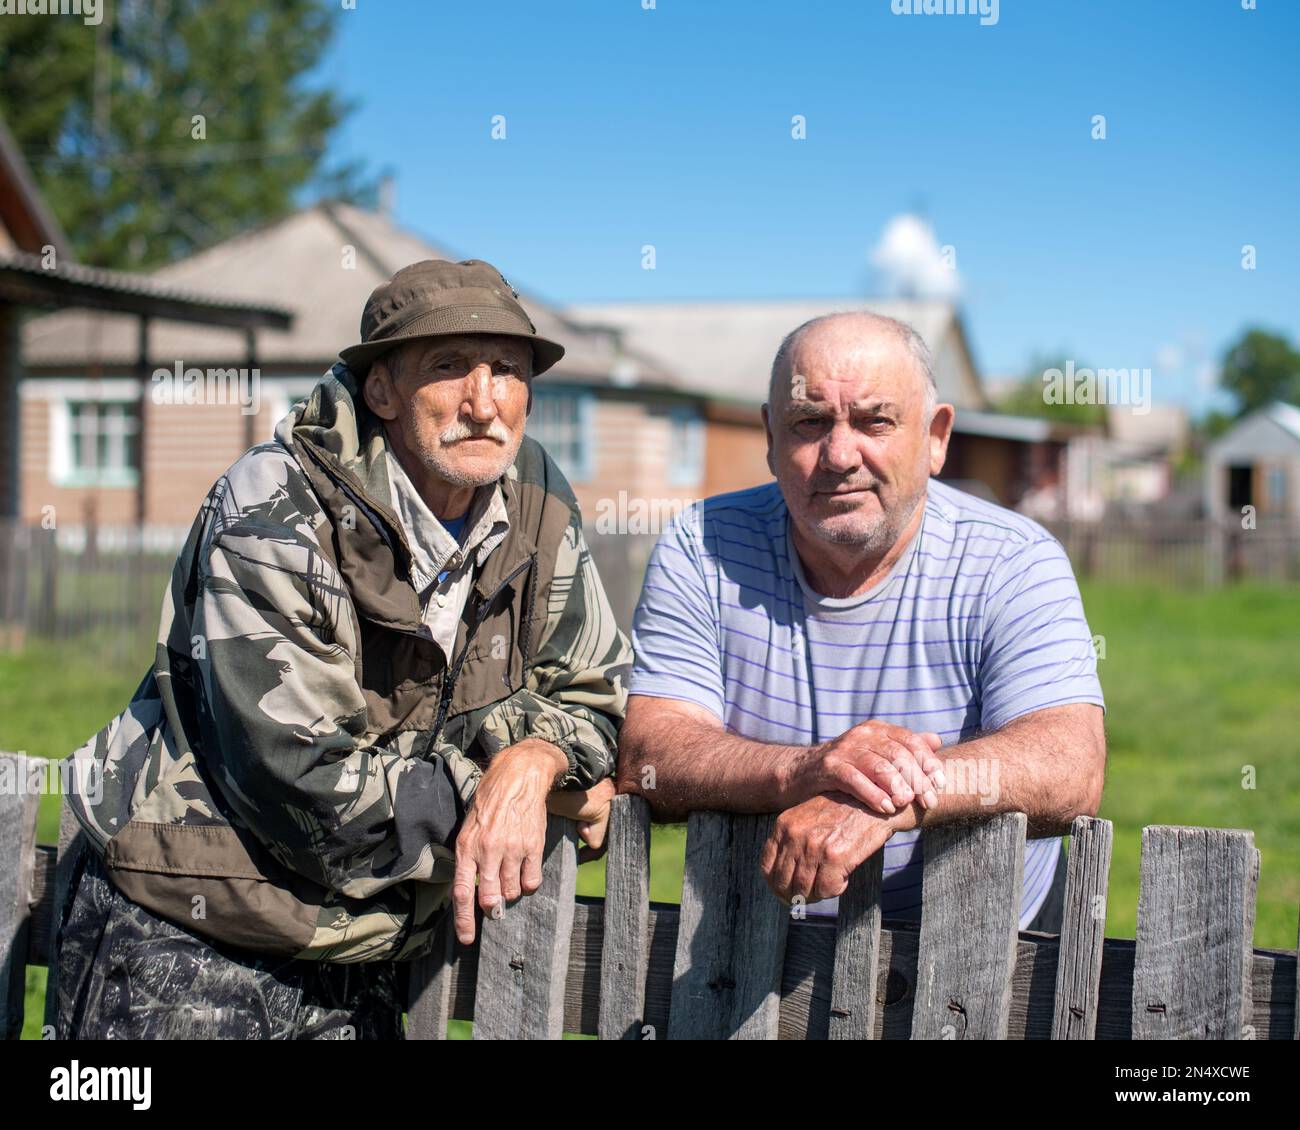 Two Russian village neighbors stand posing in conversation at the fence against the background of houses in the summer. Stock Photo